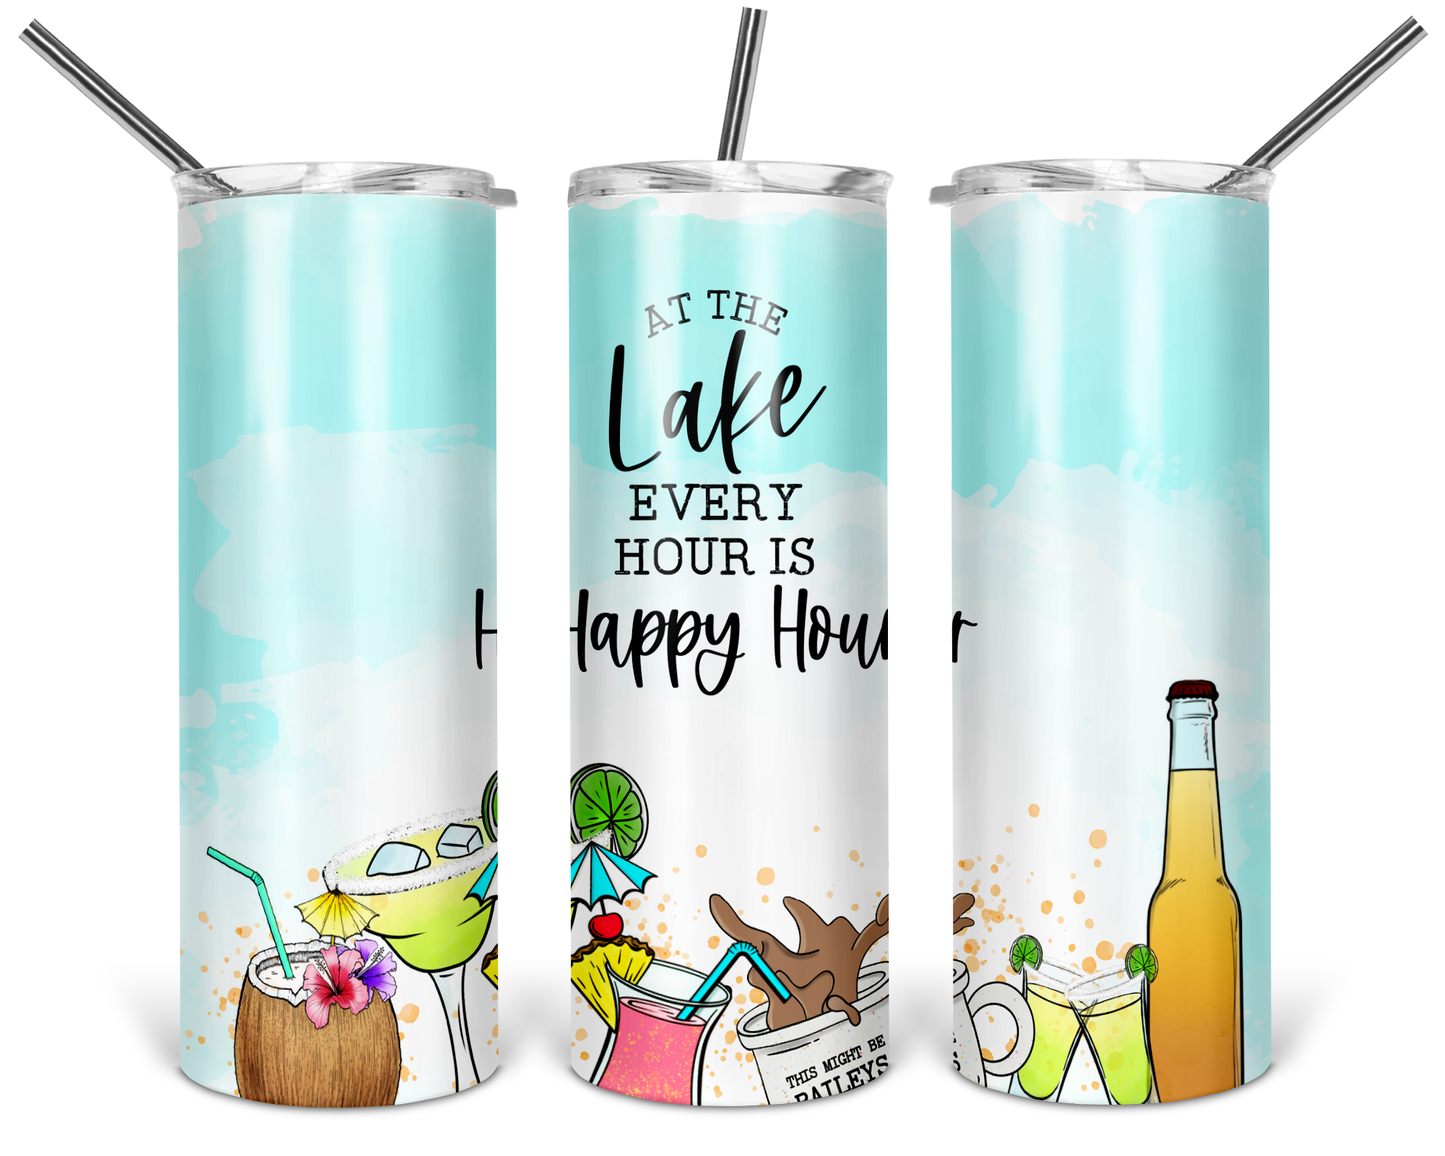 Every Hour Is Happy Hour Skinny Tumbler